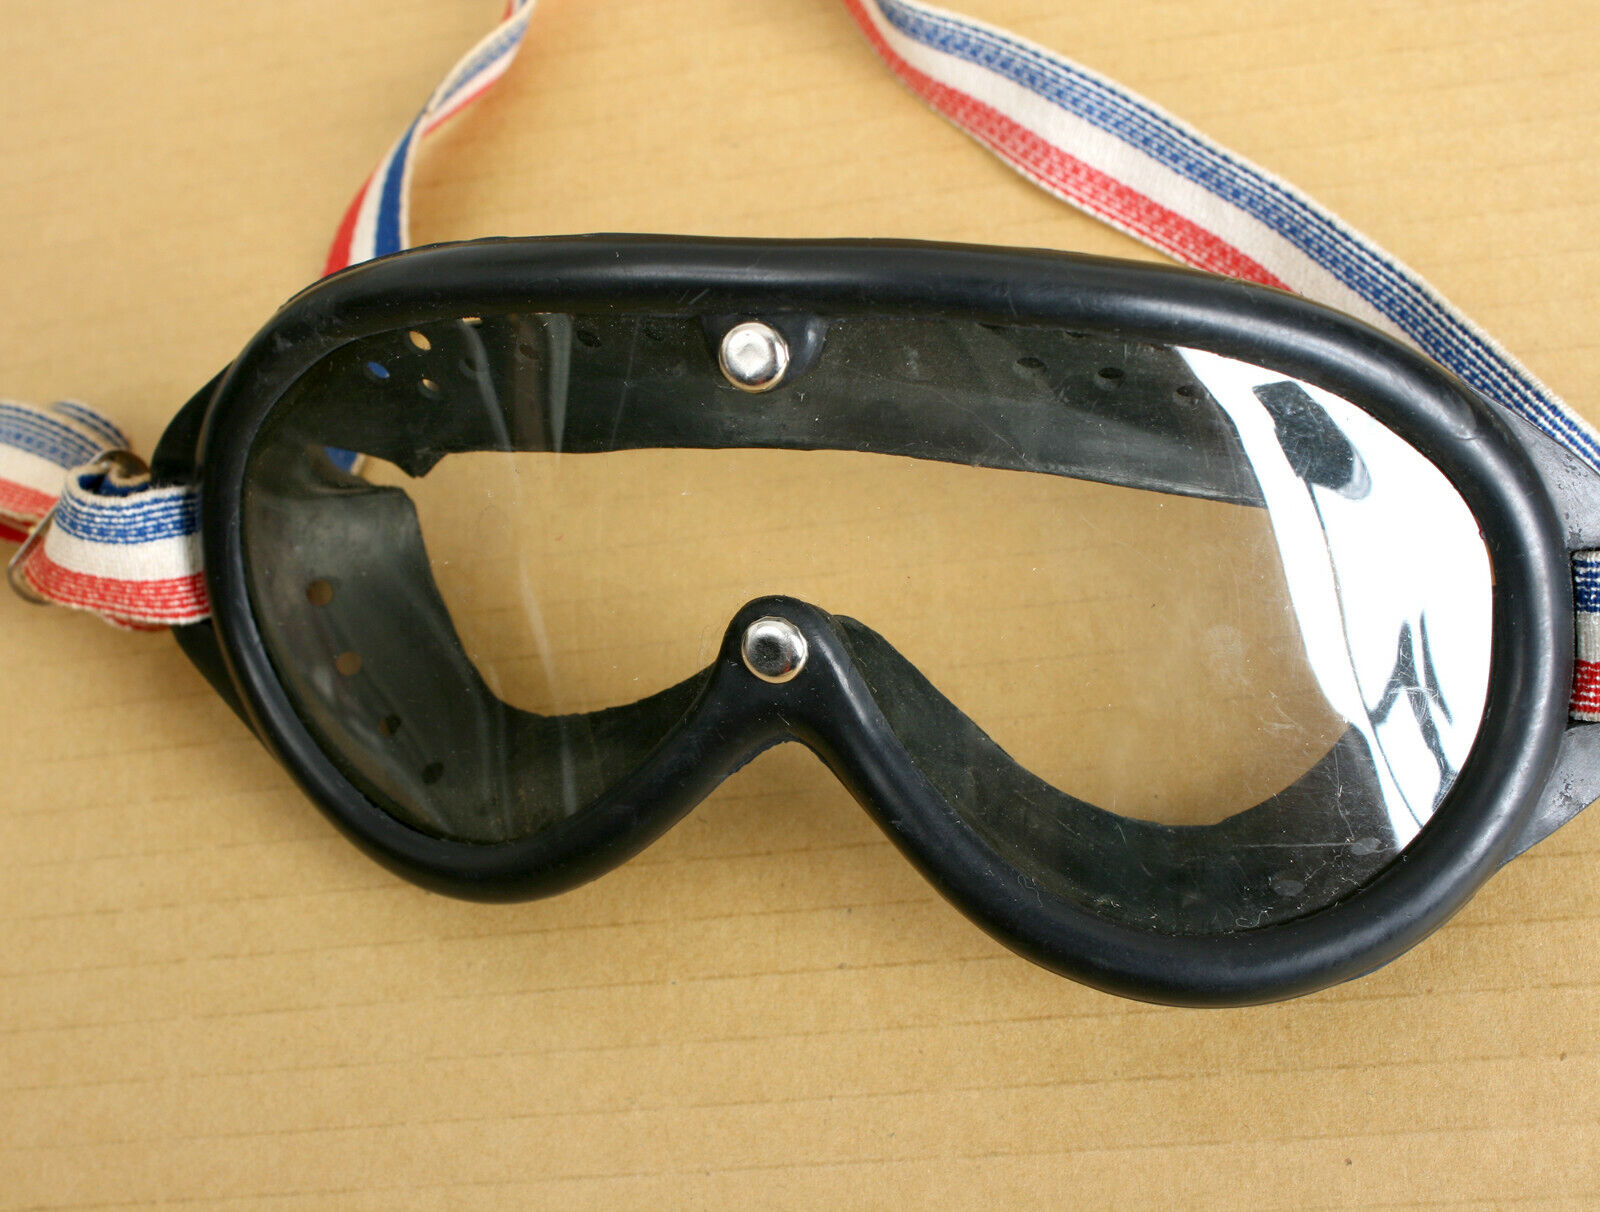 RARE Vintage 1970's Swan Vented Motorcycle Racing Goggles - Made